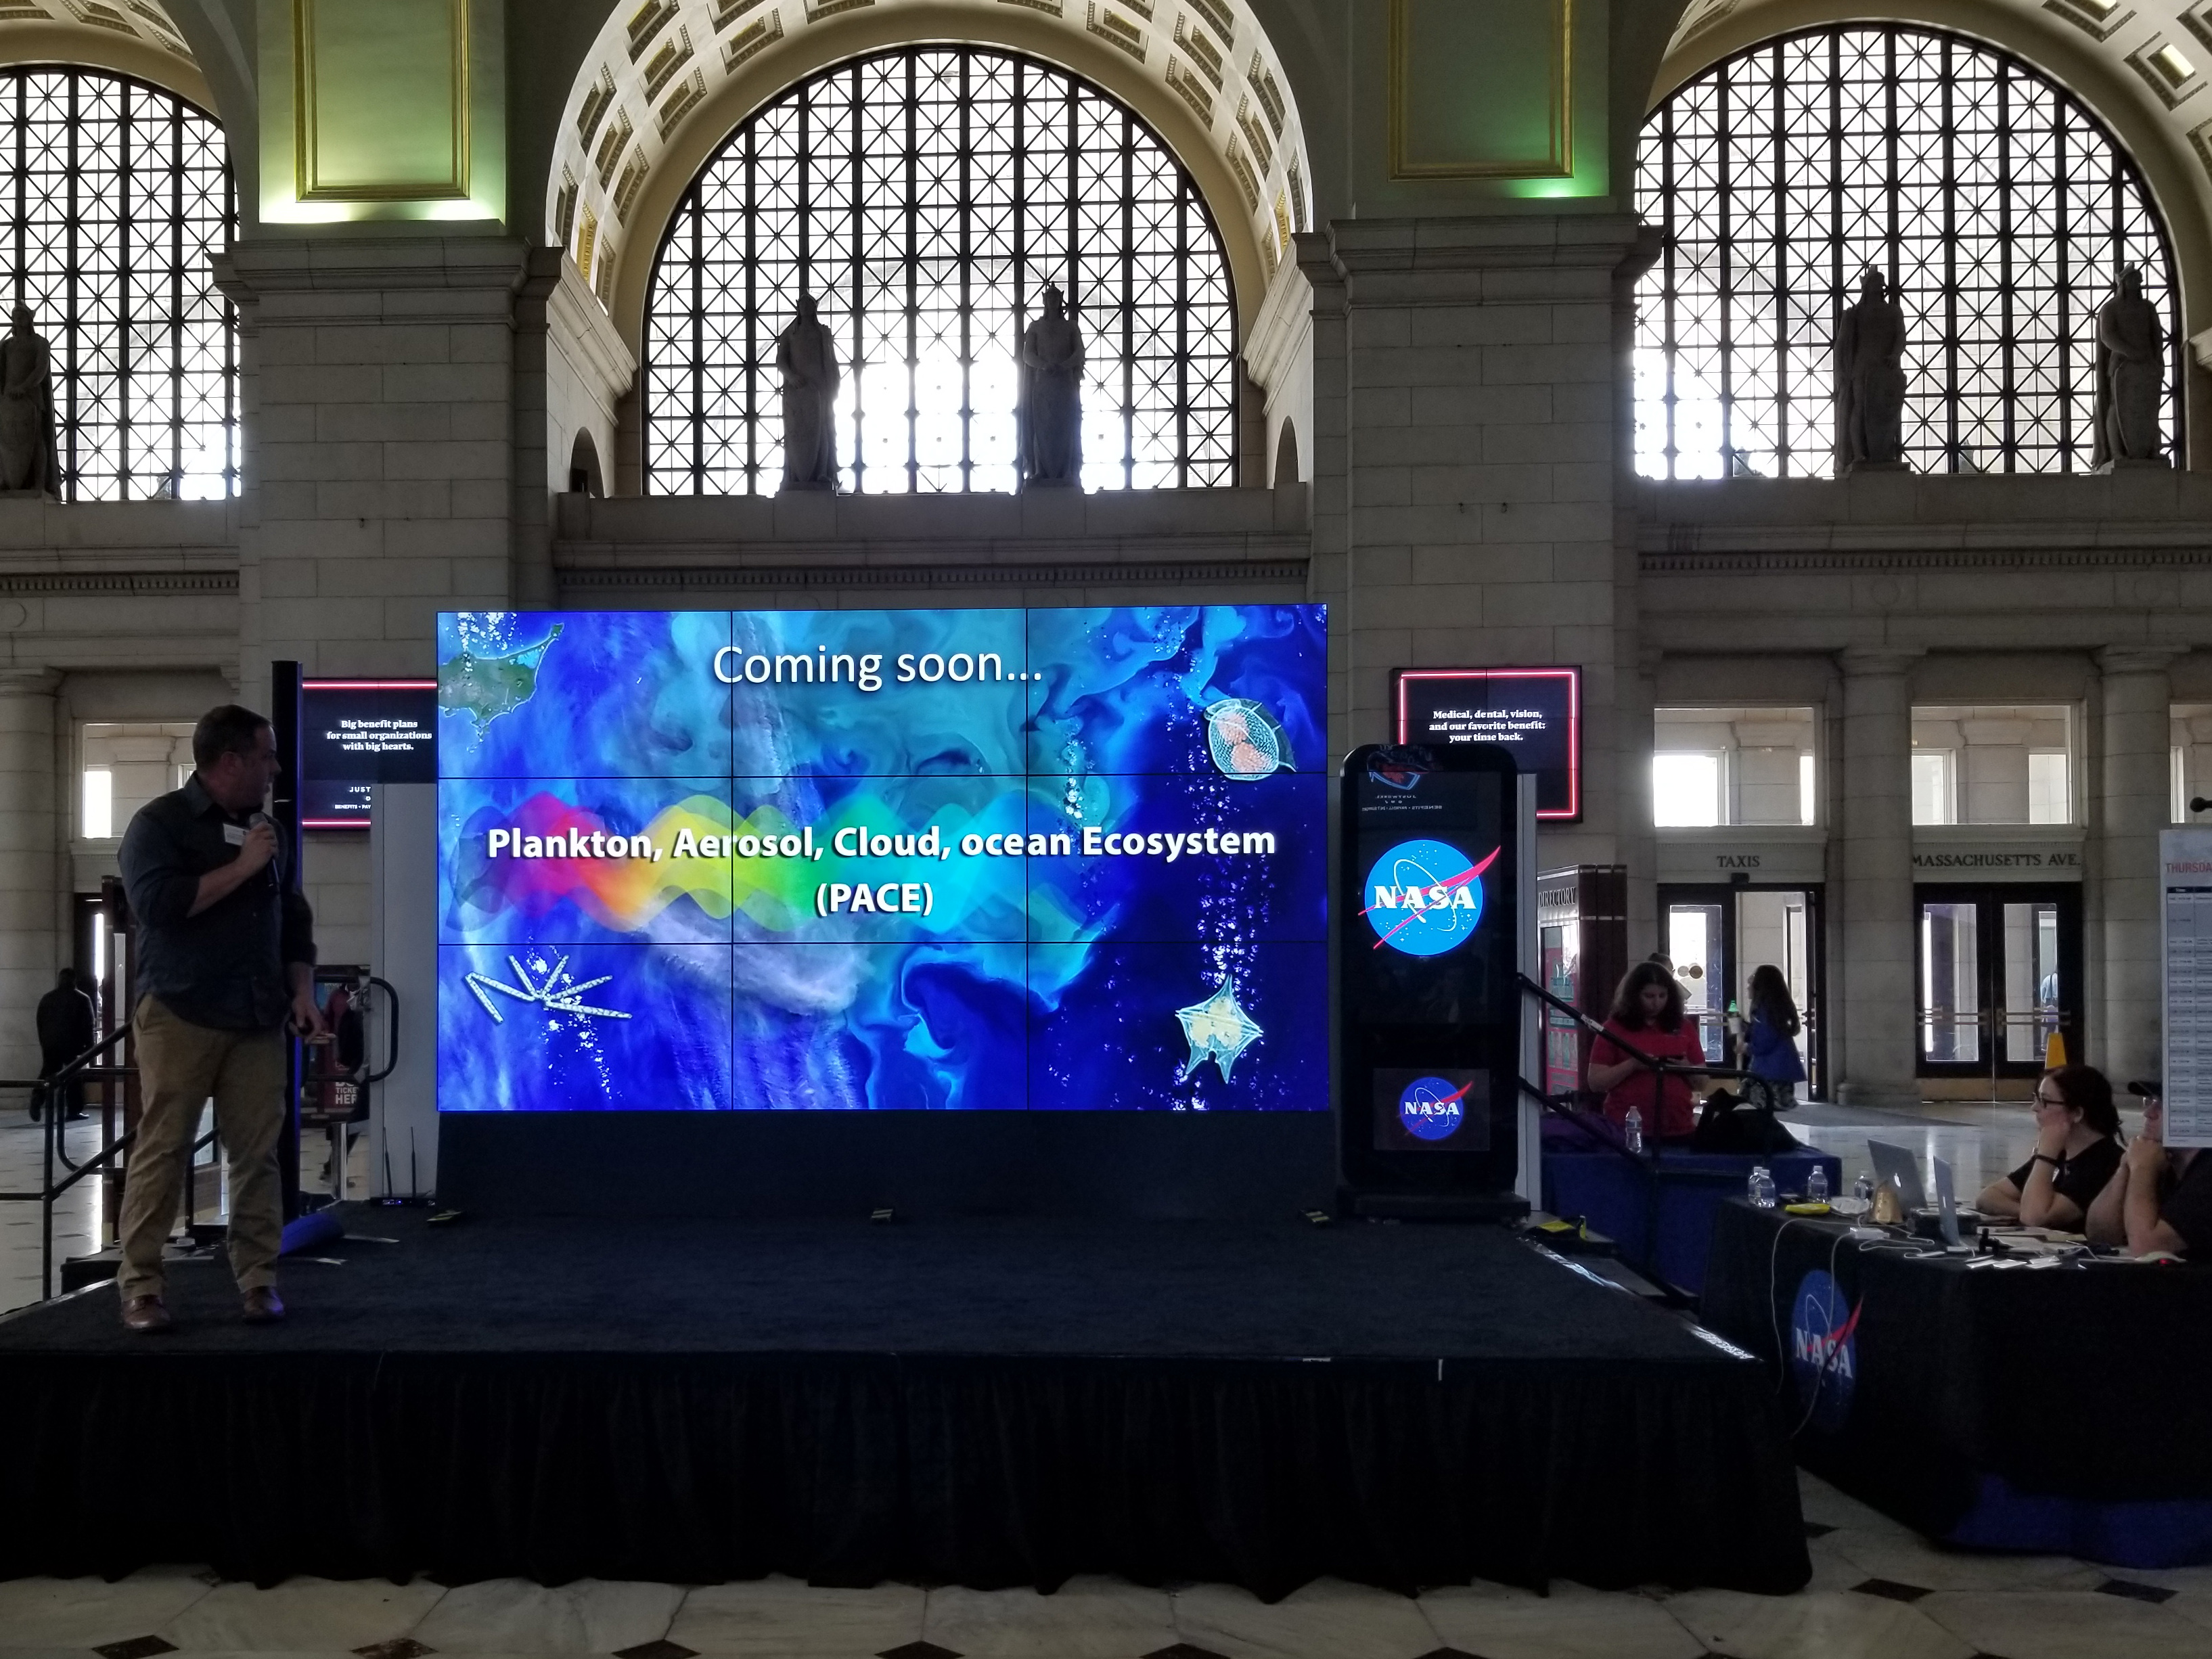 Dr. Jeremy Werdell, PACE Project Scientist, presents a hyperwall talk at the 2018 NASA Earth Day event at Union Station in Washington D.C.